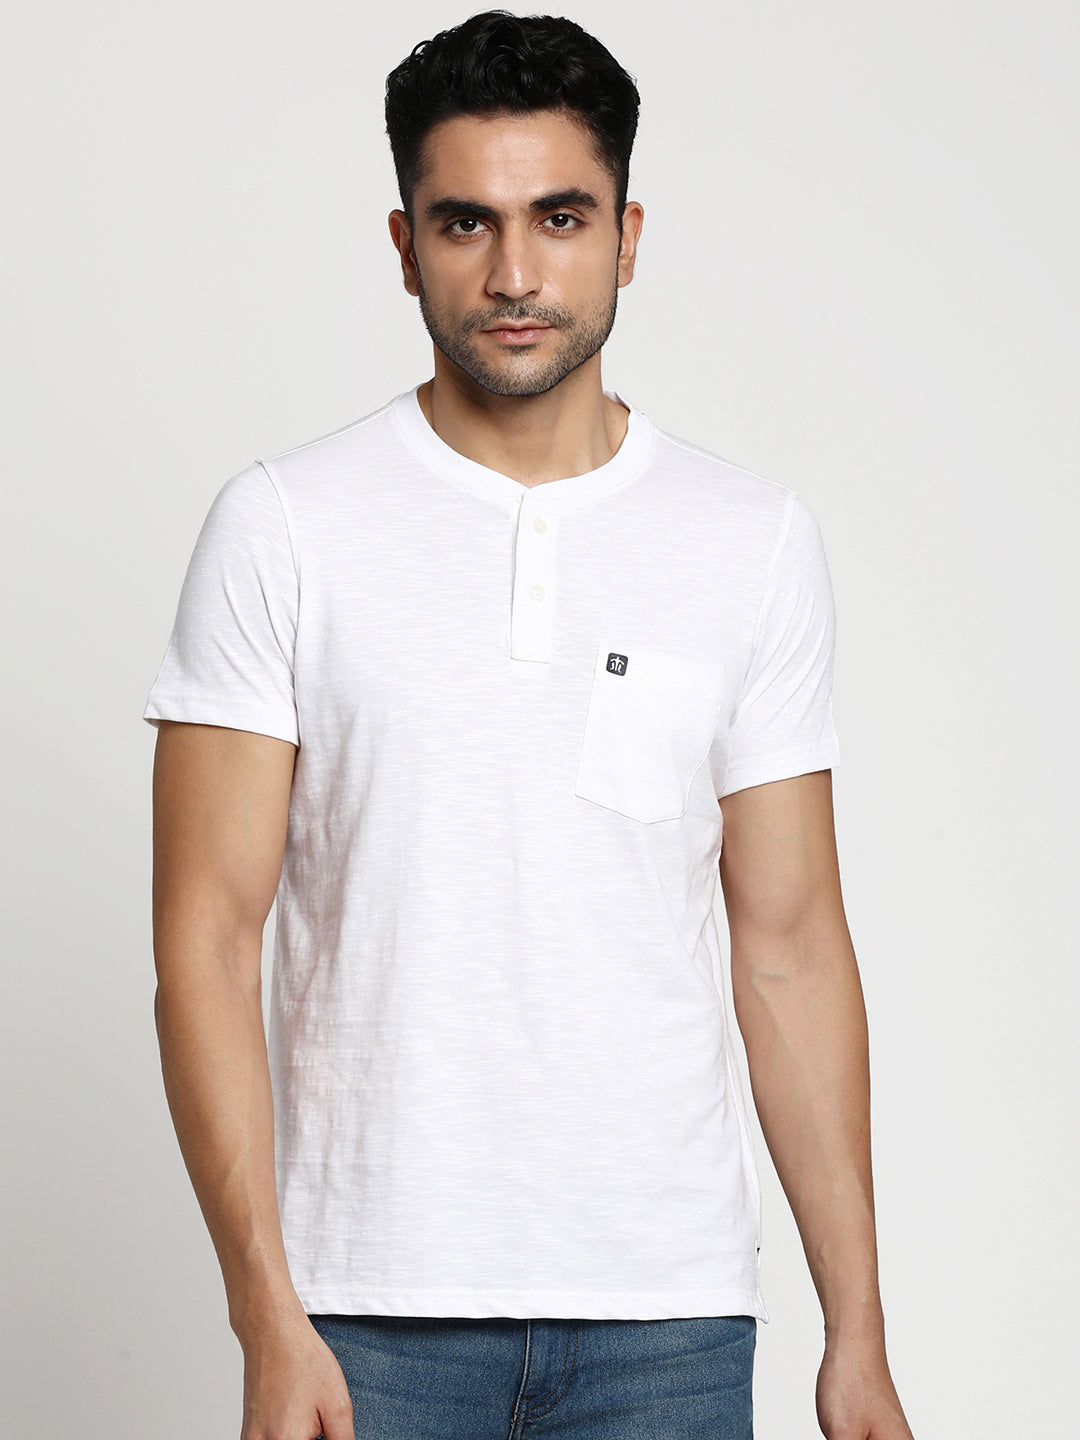 Essentials Black-White Solid Henley Neck T-Shirt (Pack of 2)